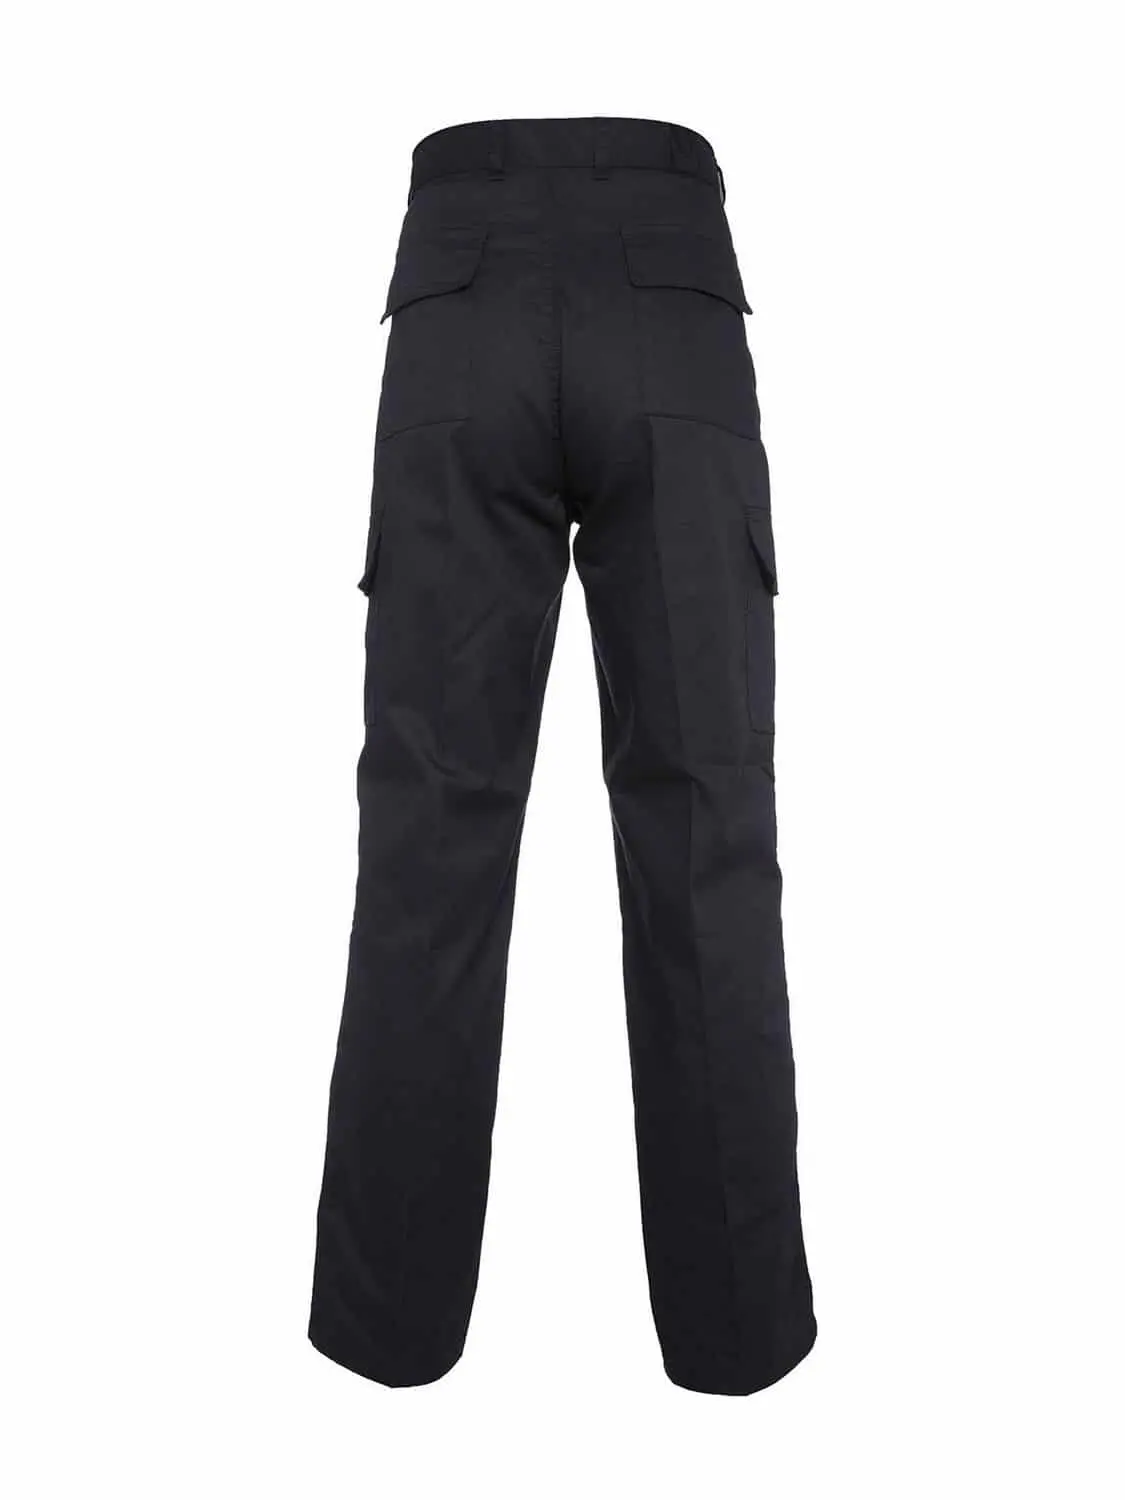 Share 89+ black military style cargo pants super hot - in.eteachers